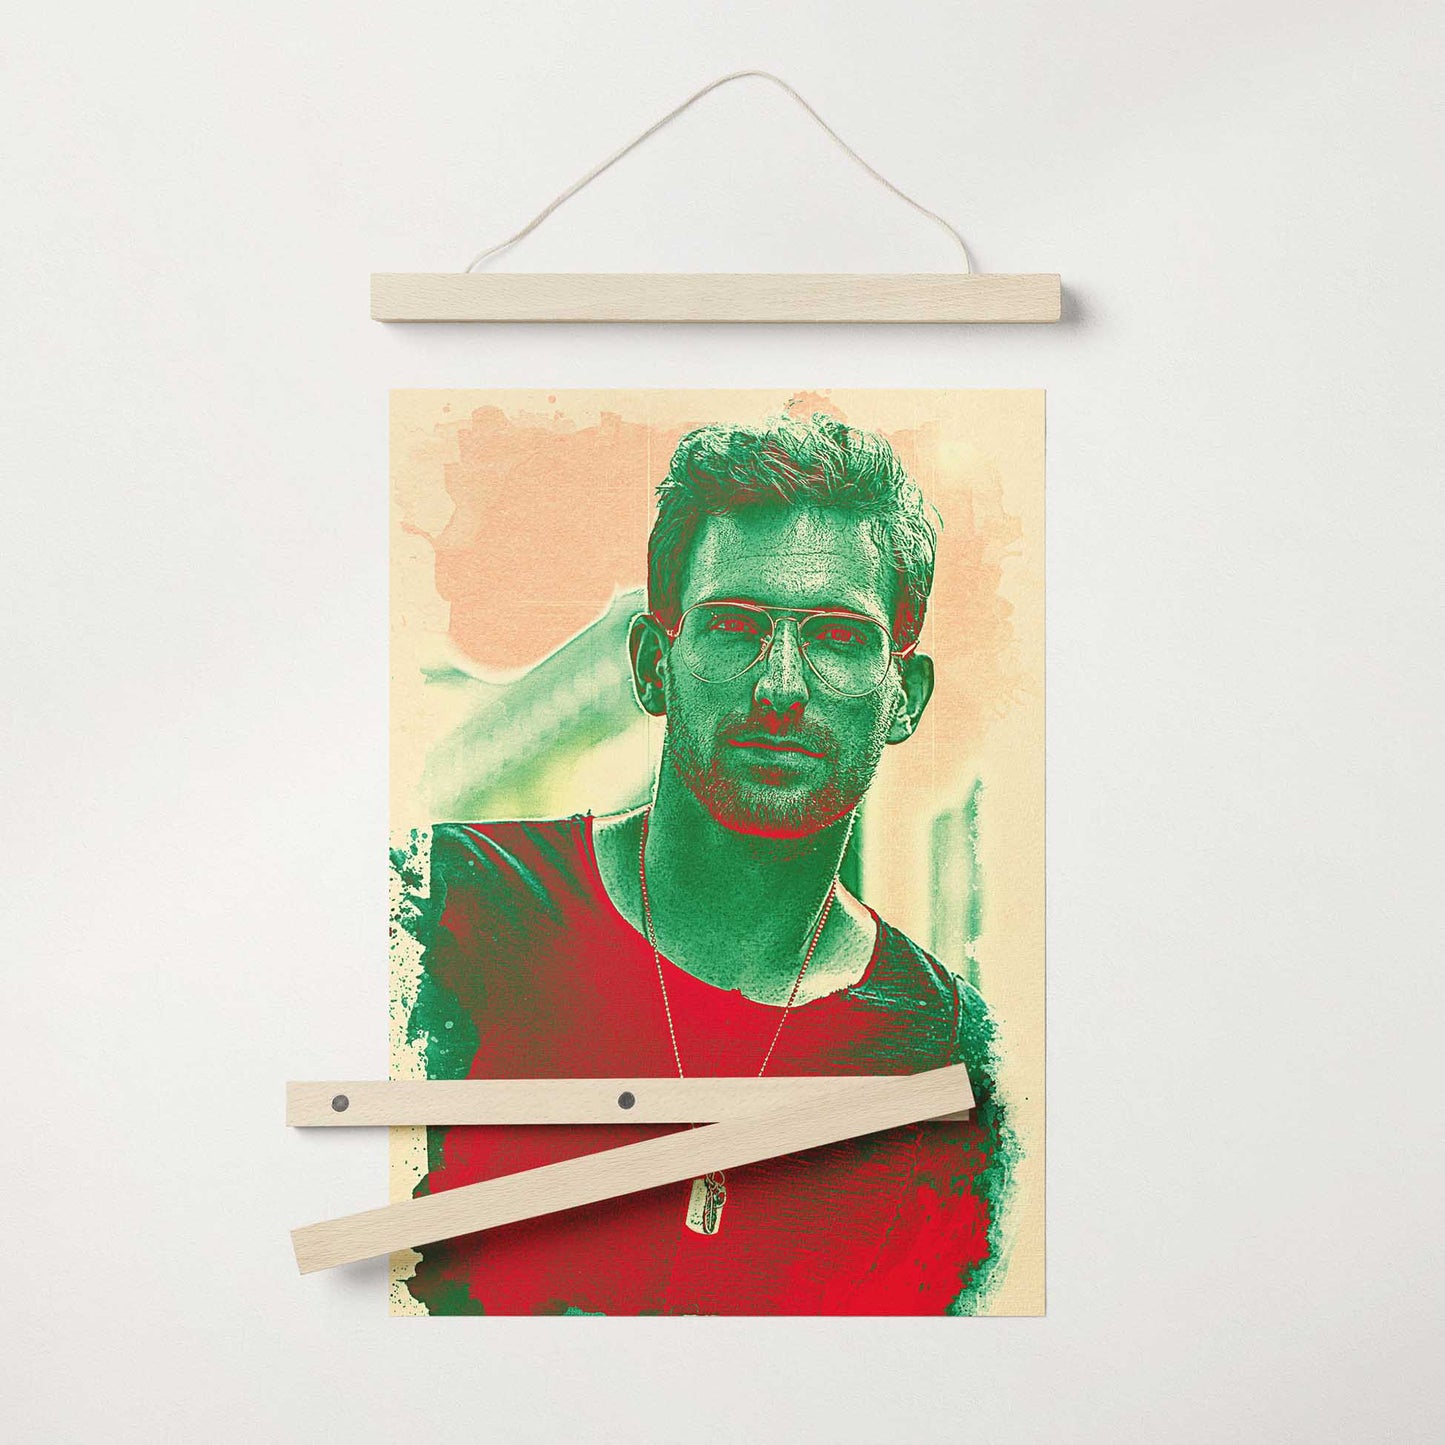 The Personalised Green & Red Poster Hanger is a gallery-quality masterpiece that adds a touch of sophistication to any space. Its cool and fresh green and red hues blend seamlessly with modern decor, watercolour style print